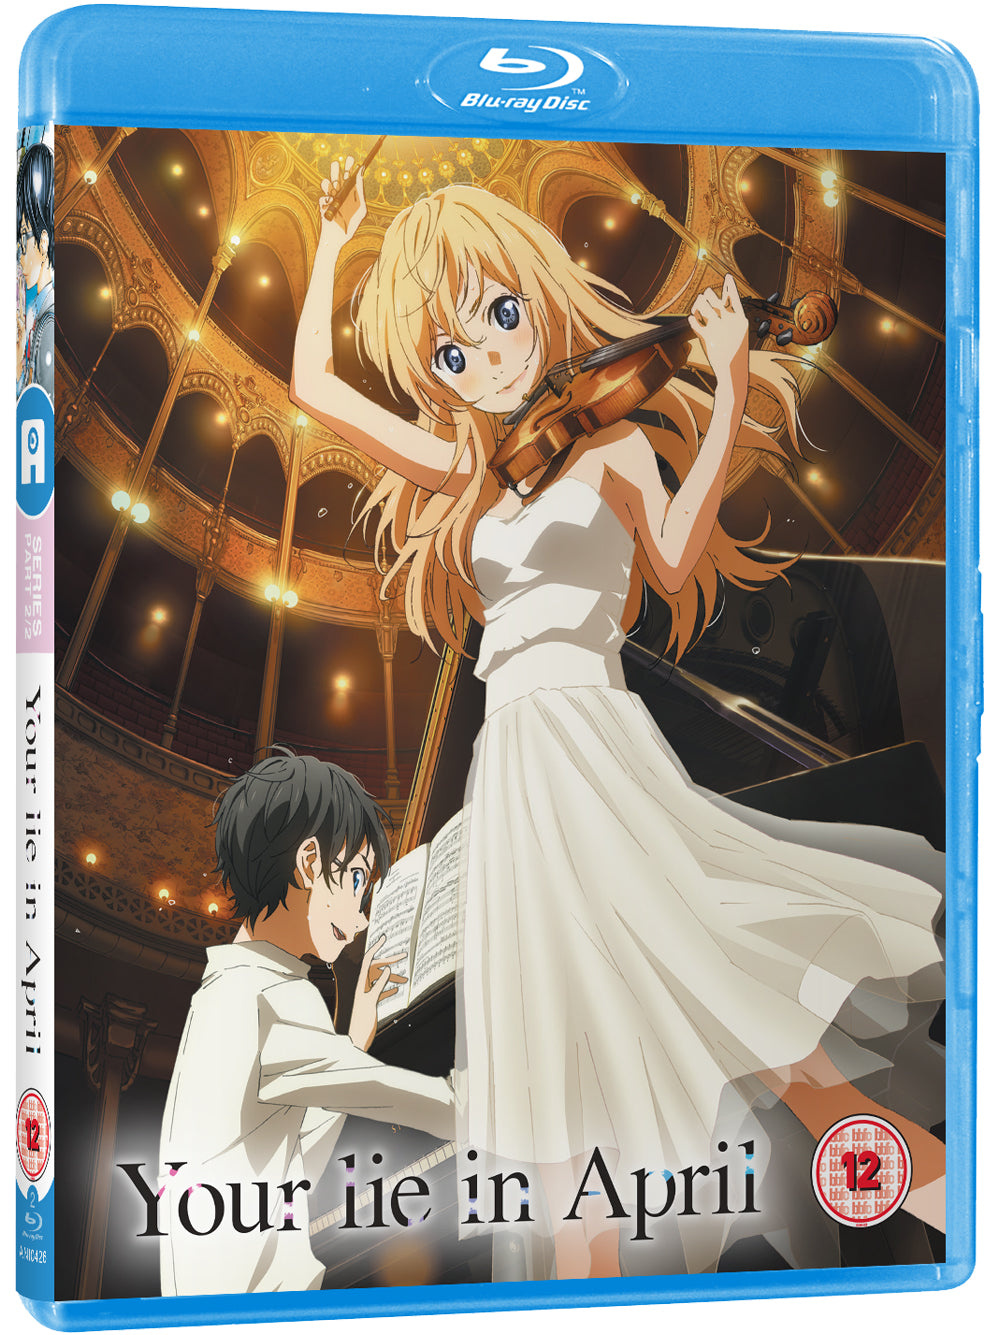 your lie in april anime blue ray